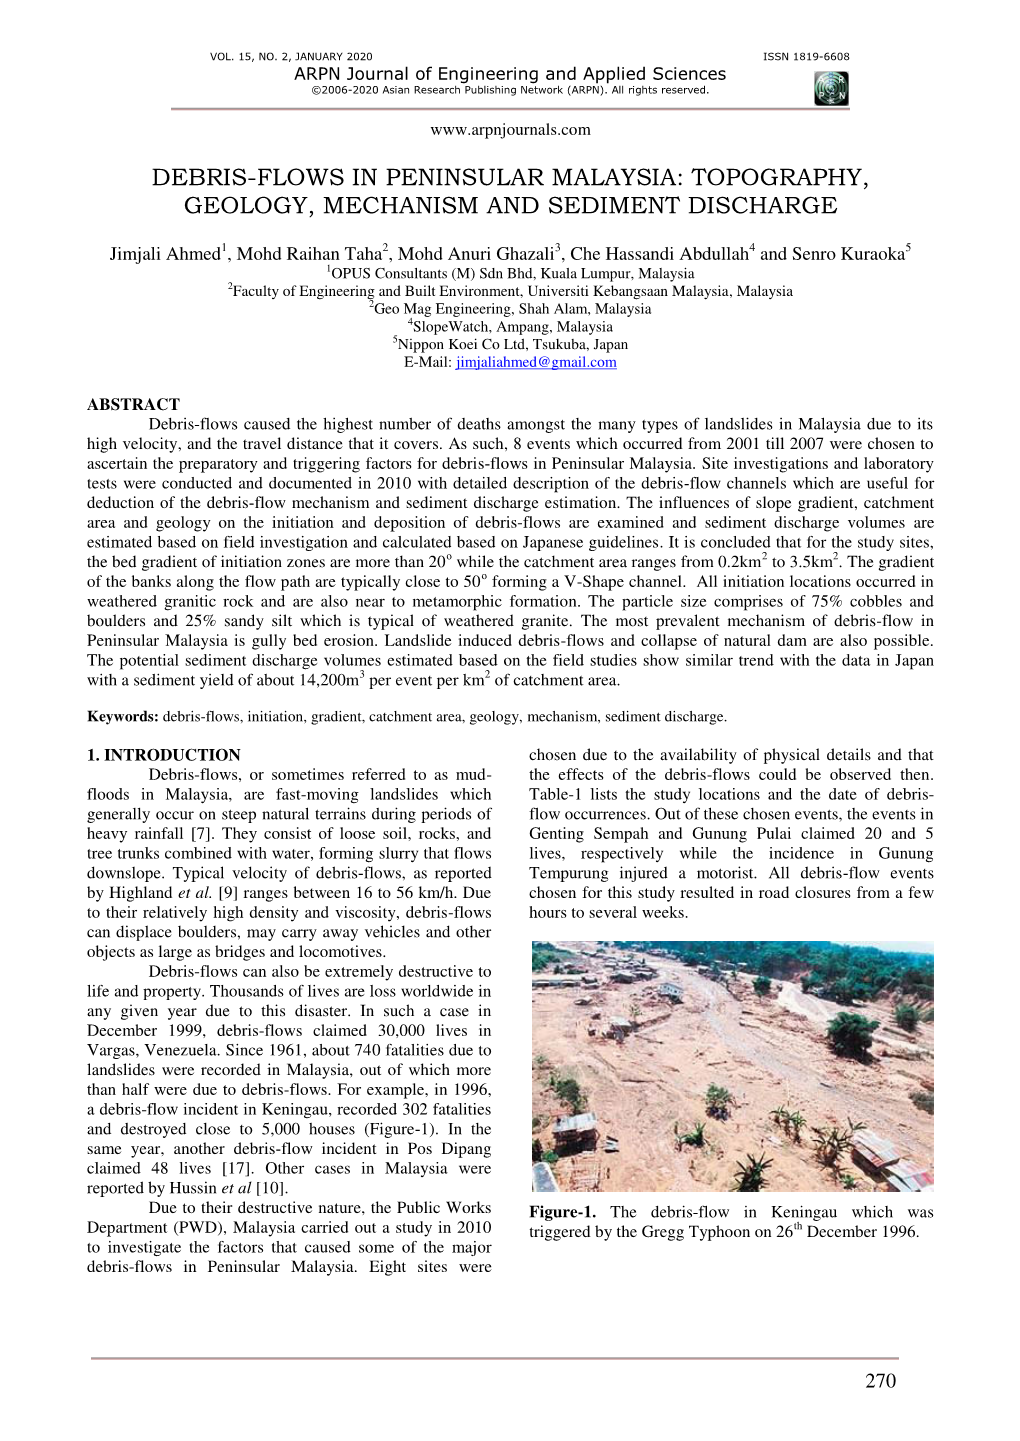 Debris-Flows in Peninsular Malaysia: Topography, Geology, Mechanism and Sediment Discharge